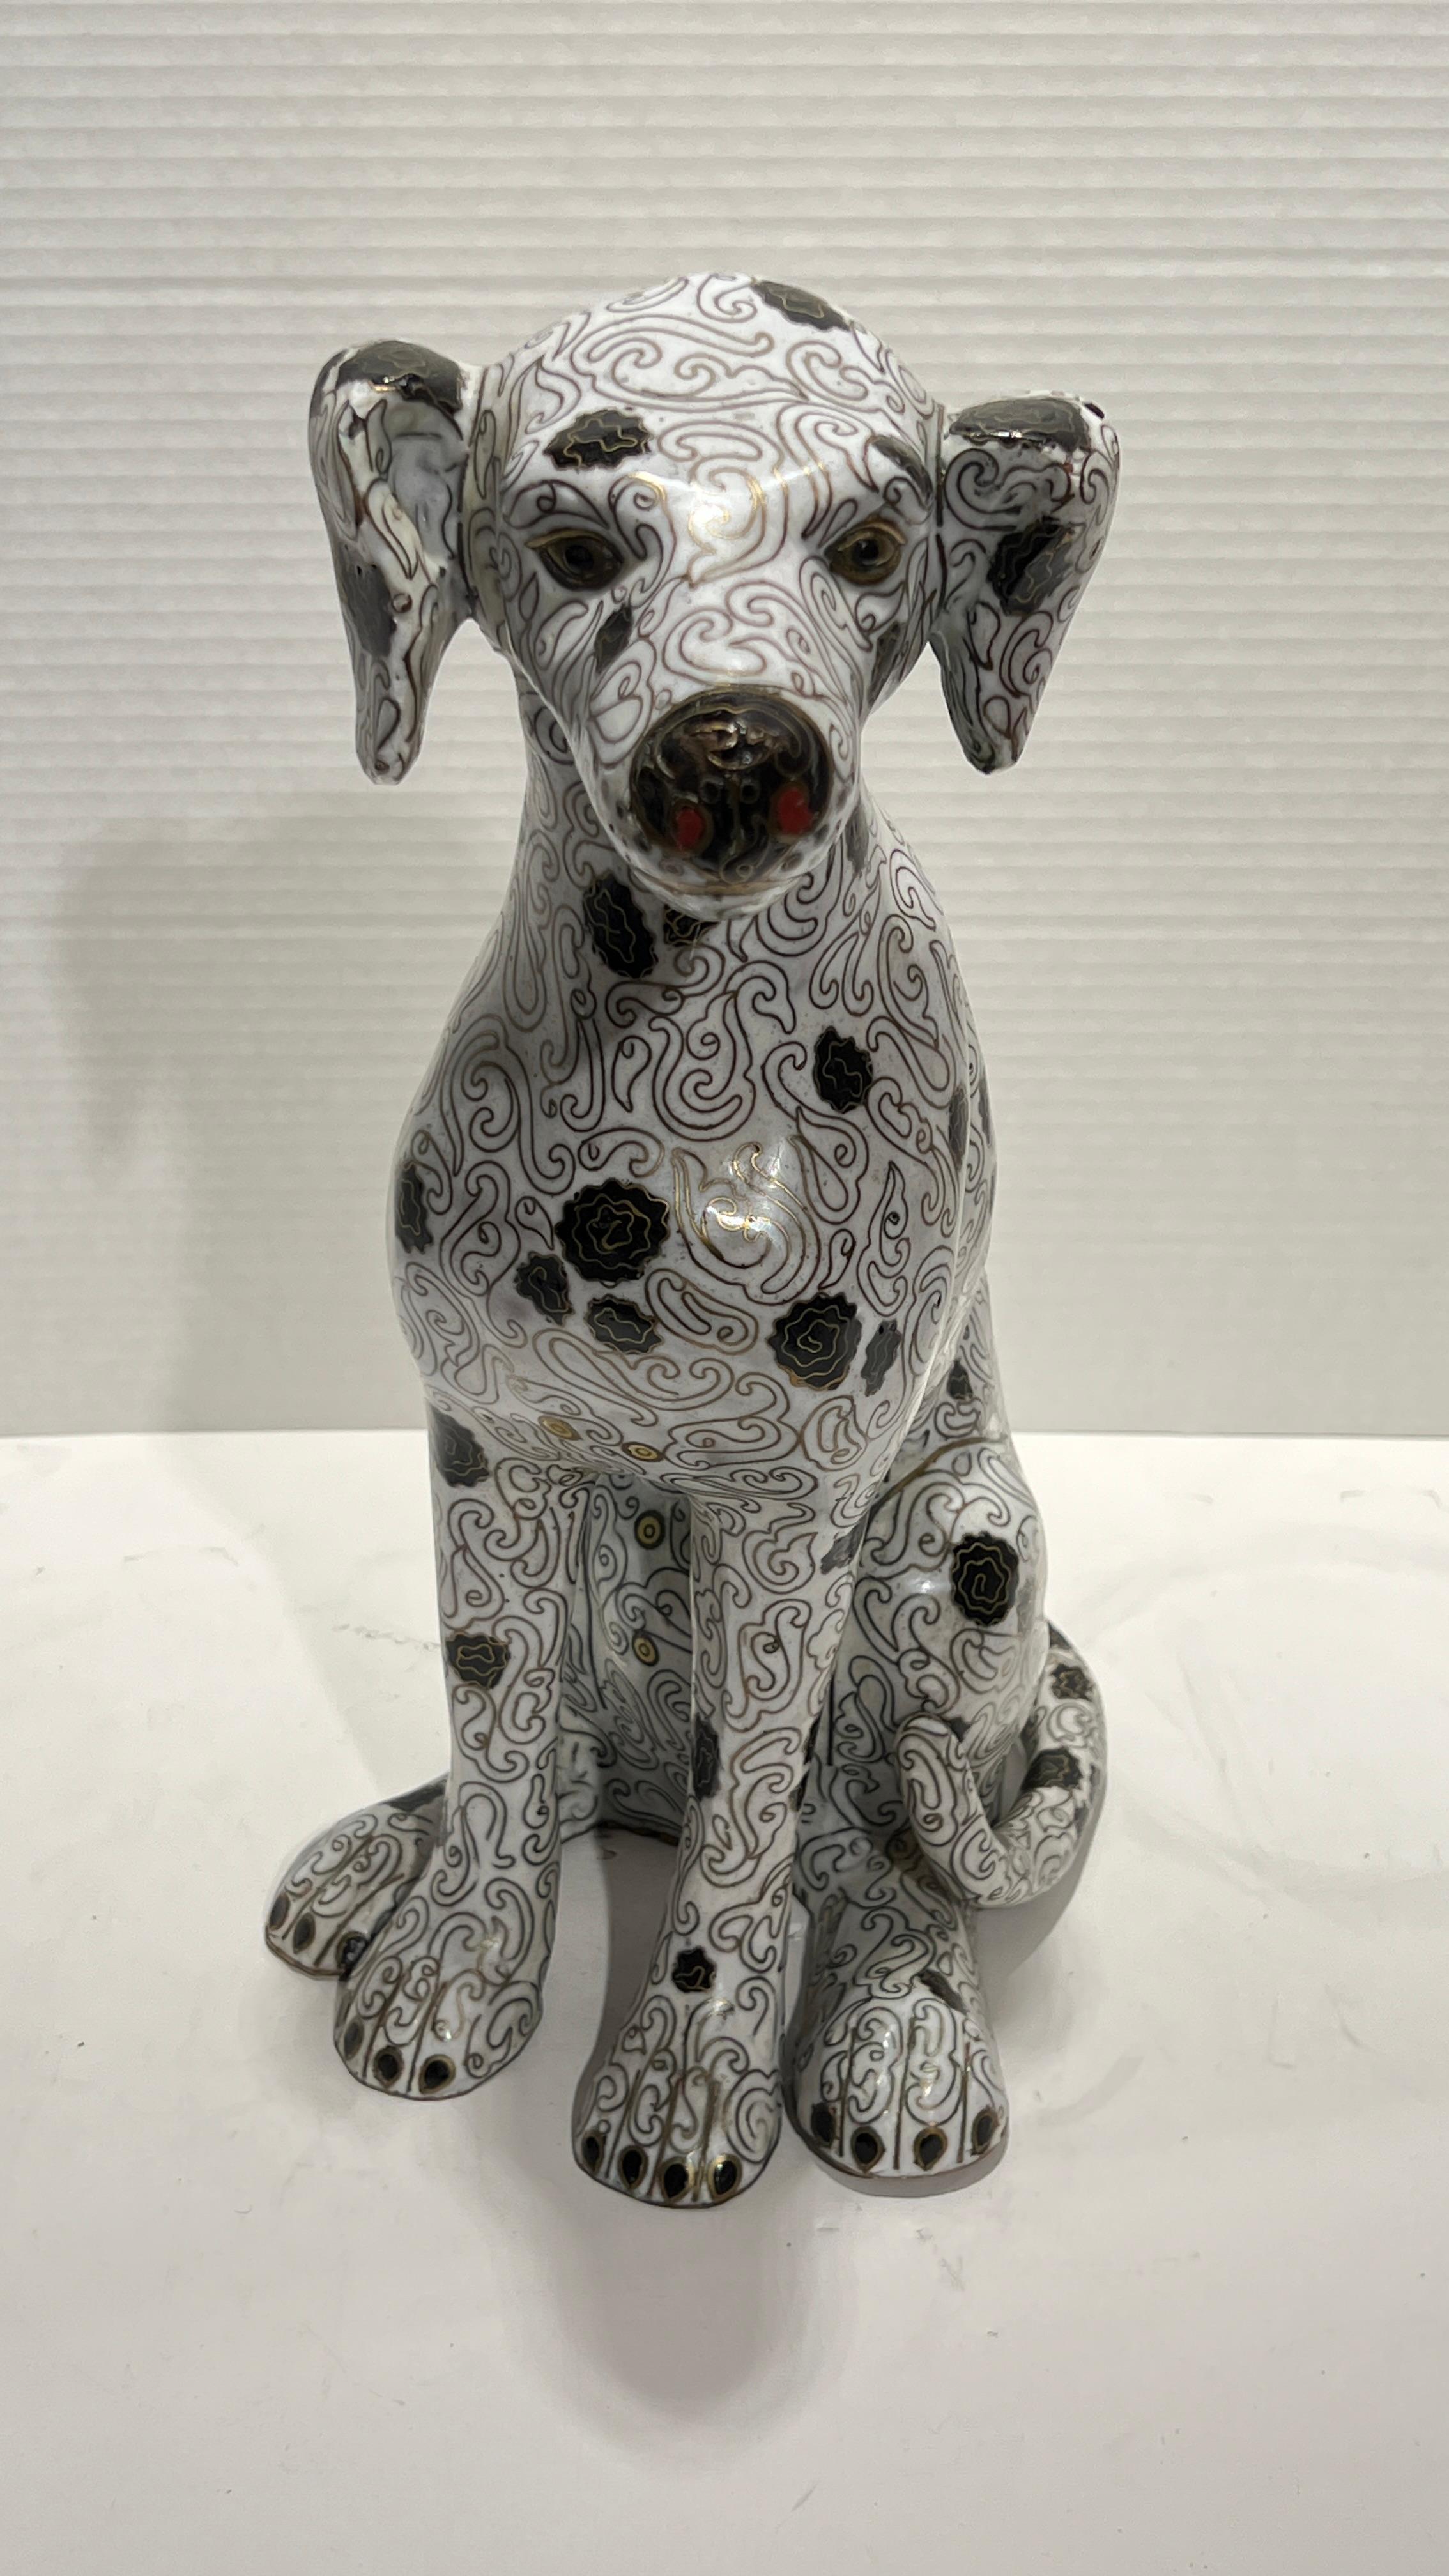 Vintage Chinese Cloisonne Figure of a Seated Dalmatian Puppy For Sale 2